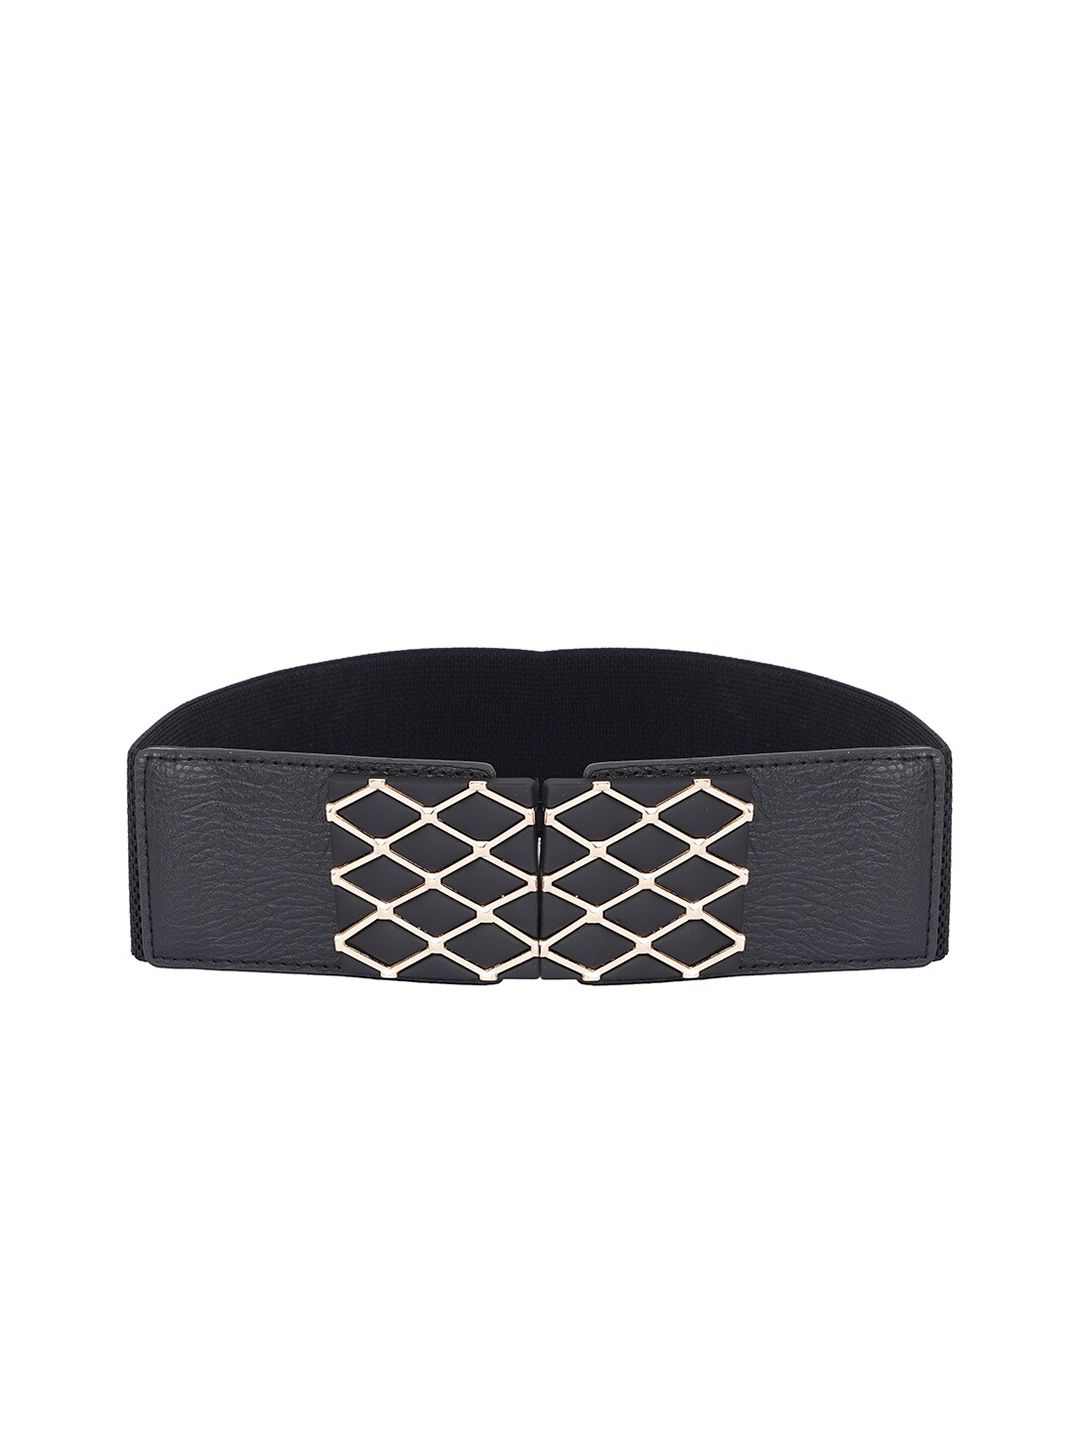 Style SHOES Women Black Textured Elasticated  Belt Price in India